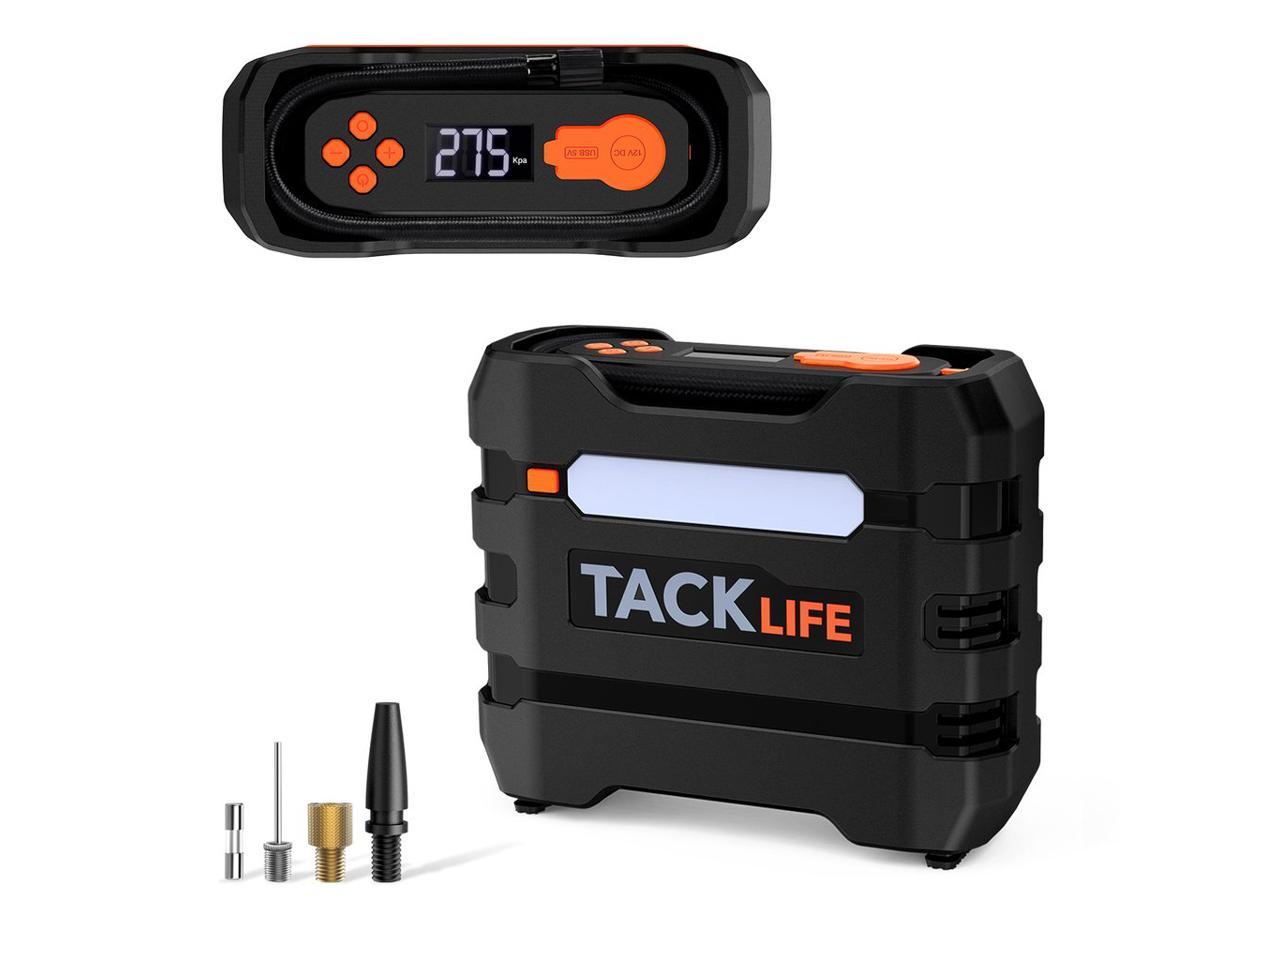 TACKLIFE Tire Inflator ACP1C and Extra Fuse DC 12V Portable Air Compressor Pump LED Flashlight 4 Nozzle Adaptors 2 Years Warranty Digital Tire Pump with Gauge 